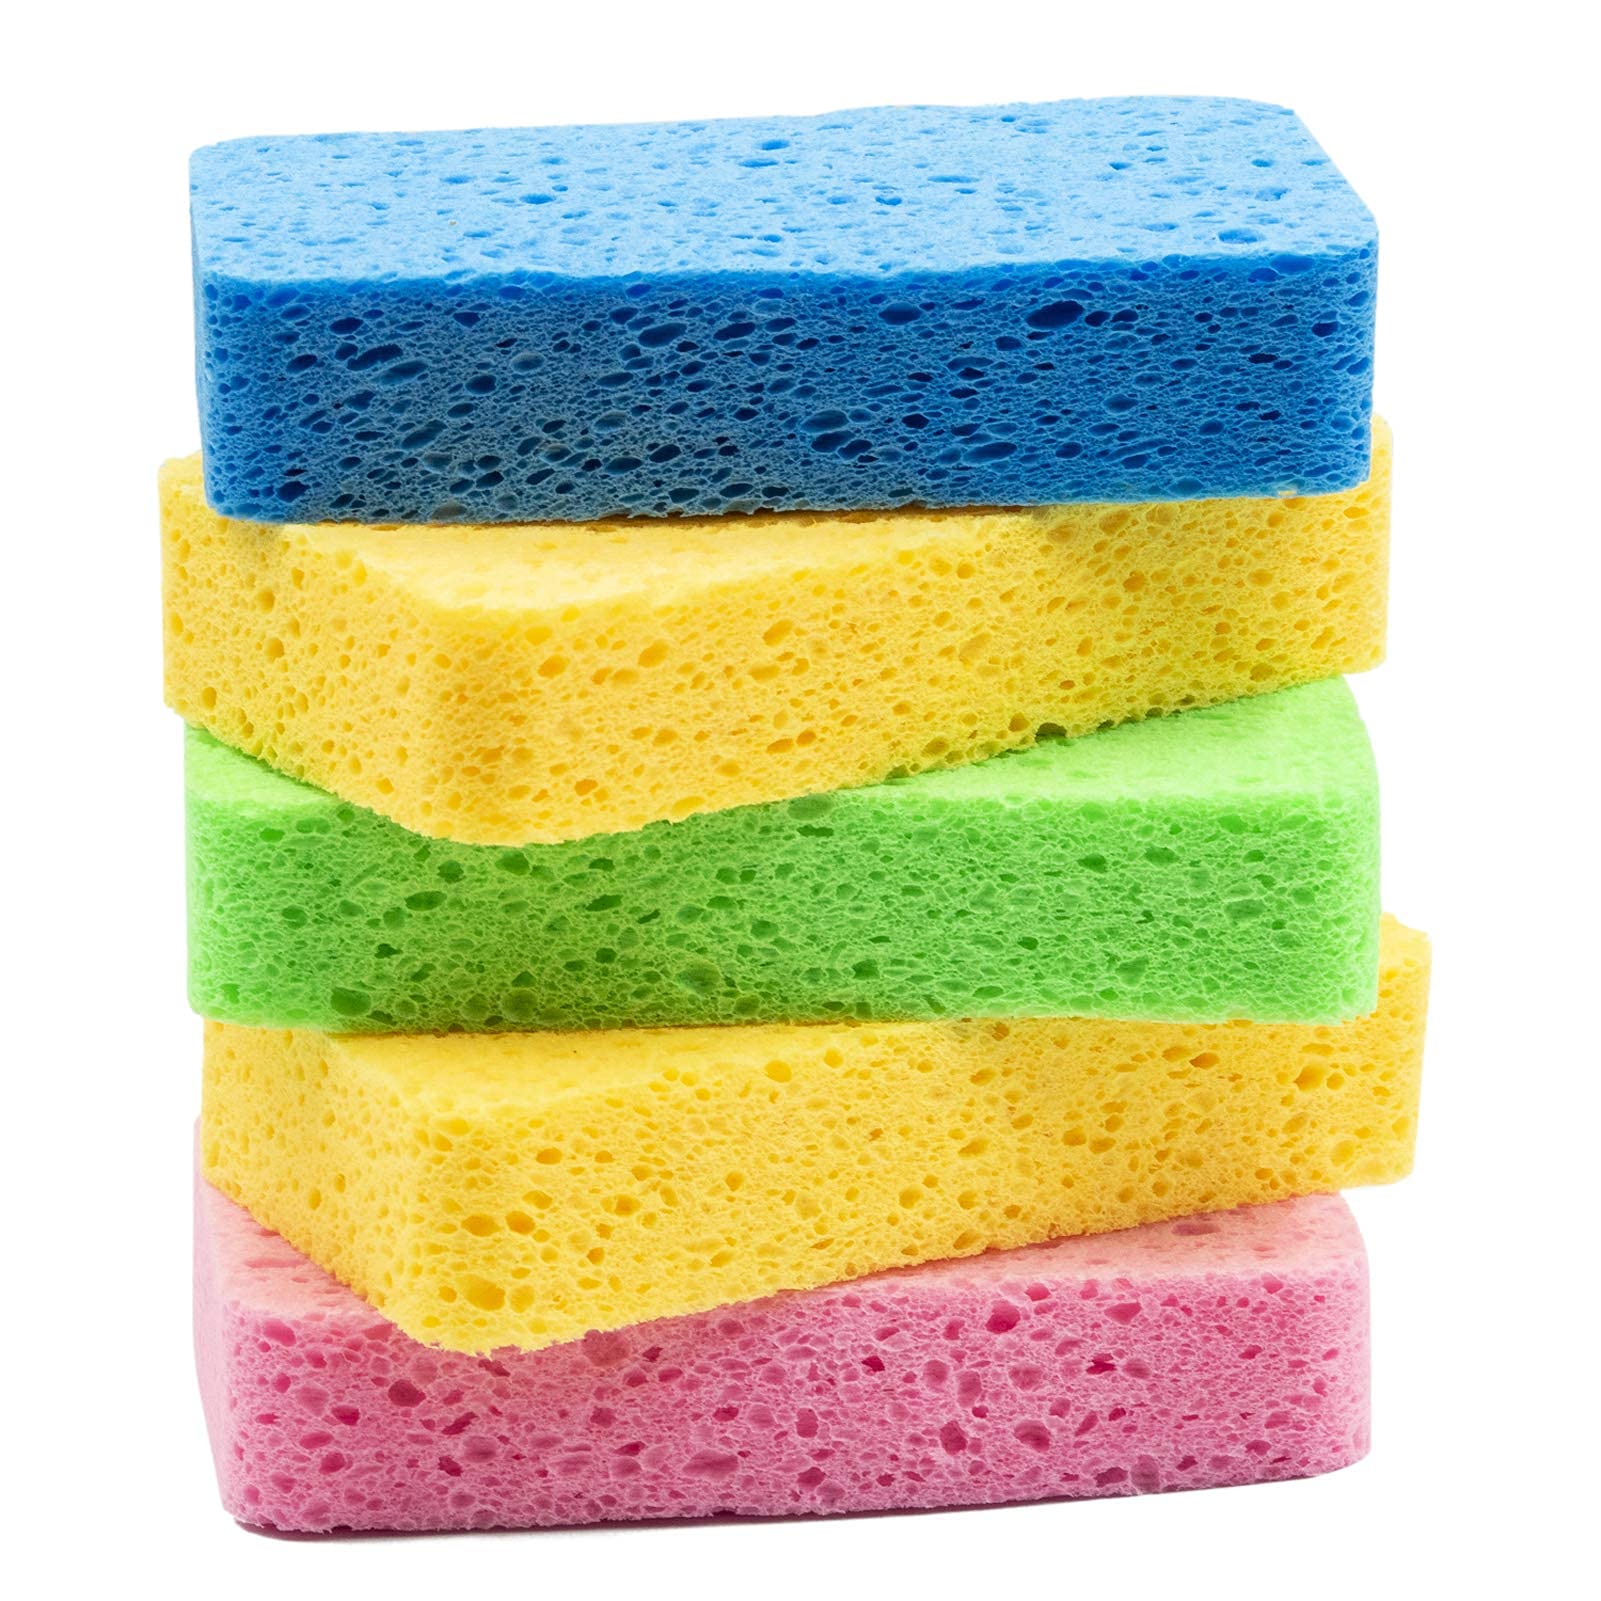 12 Pack Multi-Purpose Scrub Sponges Kitchen, Dish Sponge, Non-Scratch  Microfiber Sponge for Efficiently Cleaning Dishes, Pots, and Pans, and More